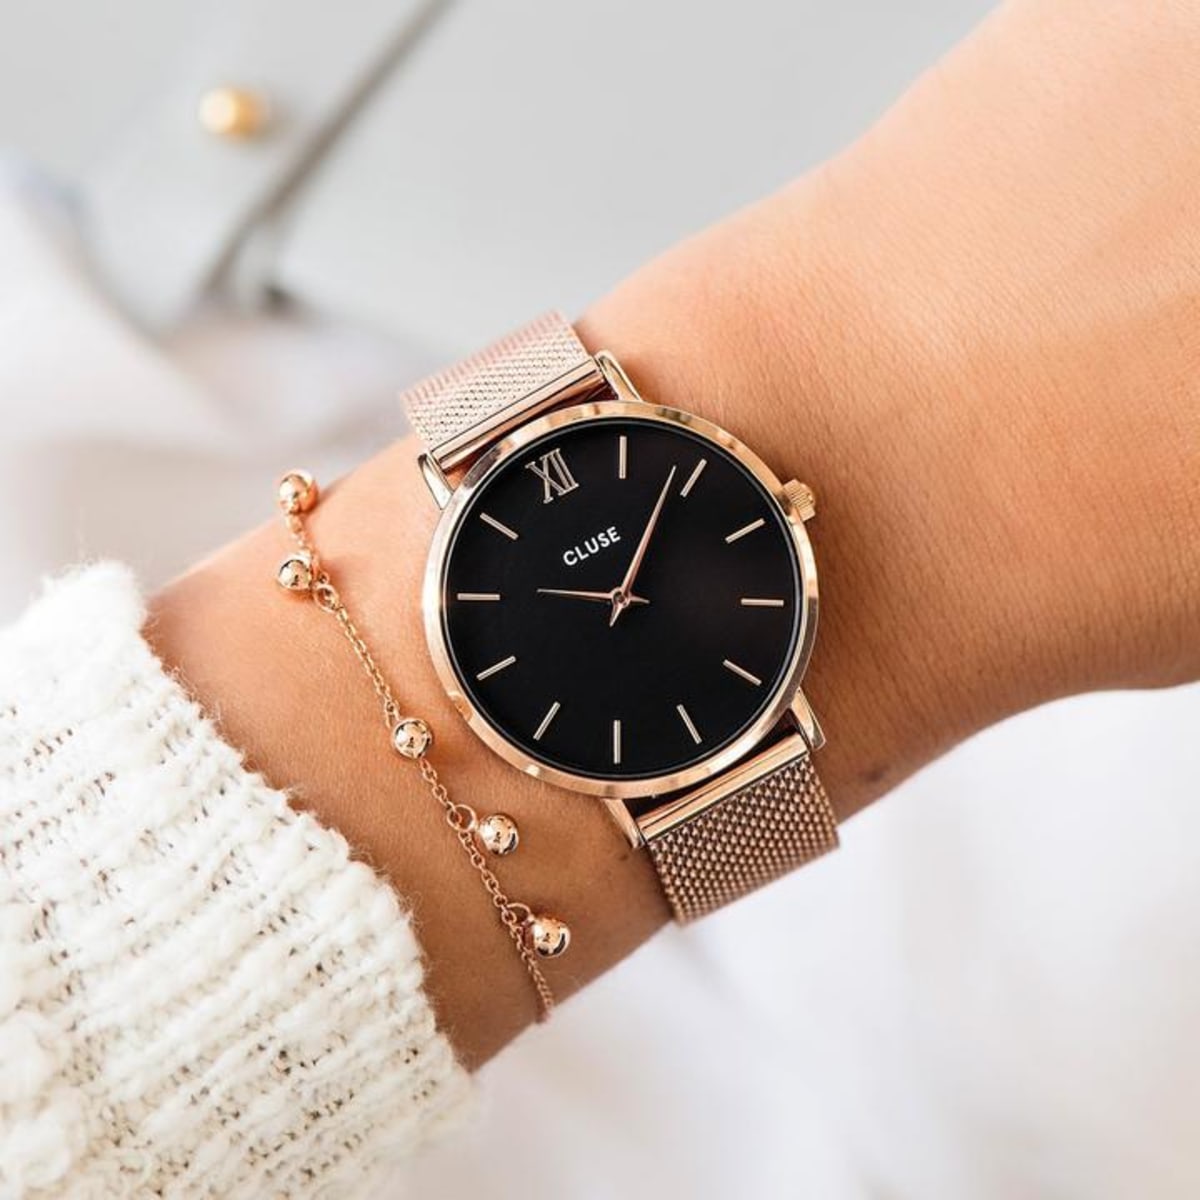 Our Minuit collection pays tribute to starry nights and elegant evening looks. The delicate design of this featherlight watch makes it the perfect accessory for a fashionable, yet subtle result. The watch features a 33 mm case, where black is combined with rose gold details to create a beautiful minimal timepiece. The strap can be easily interchanged, allowing you to personalise your watch.